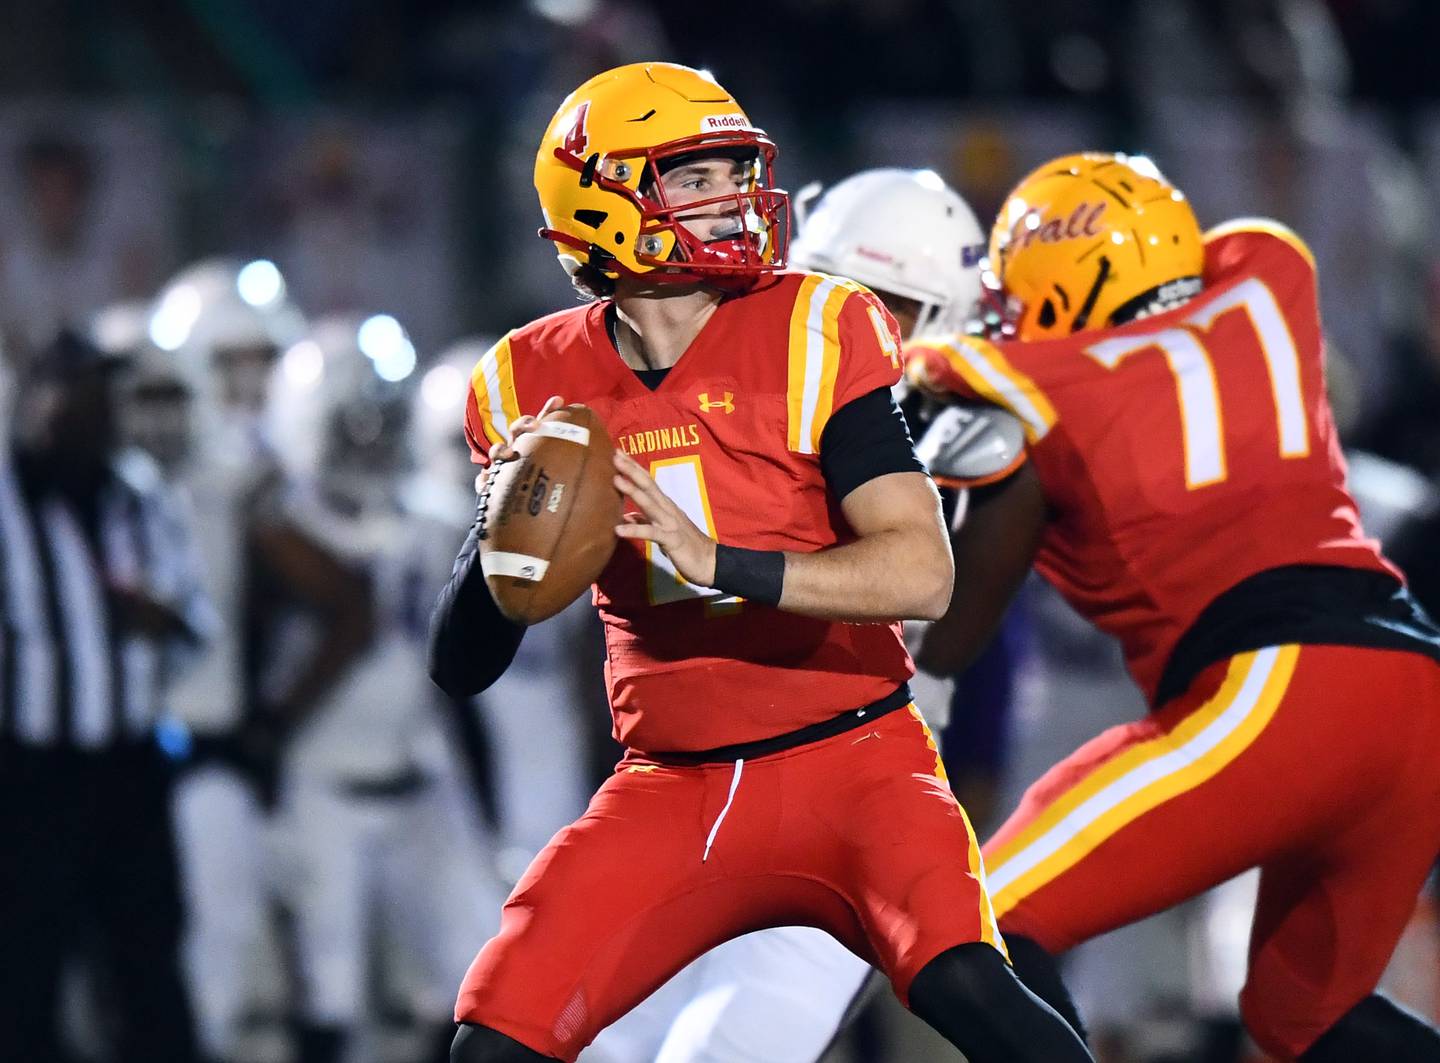 Calvert Hall senior quarterback Noah Brannock sets to throw during Friday's 33-22 loss to Mount St. Joseph in MIAA A Conference action.